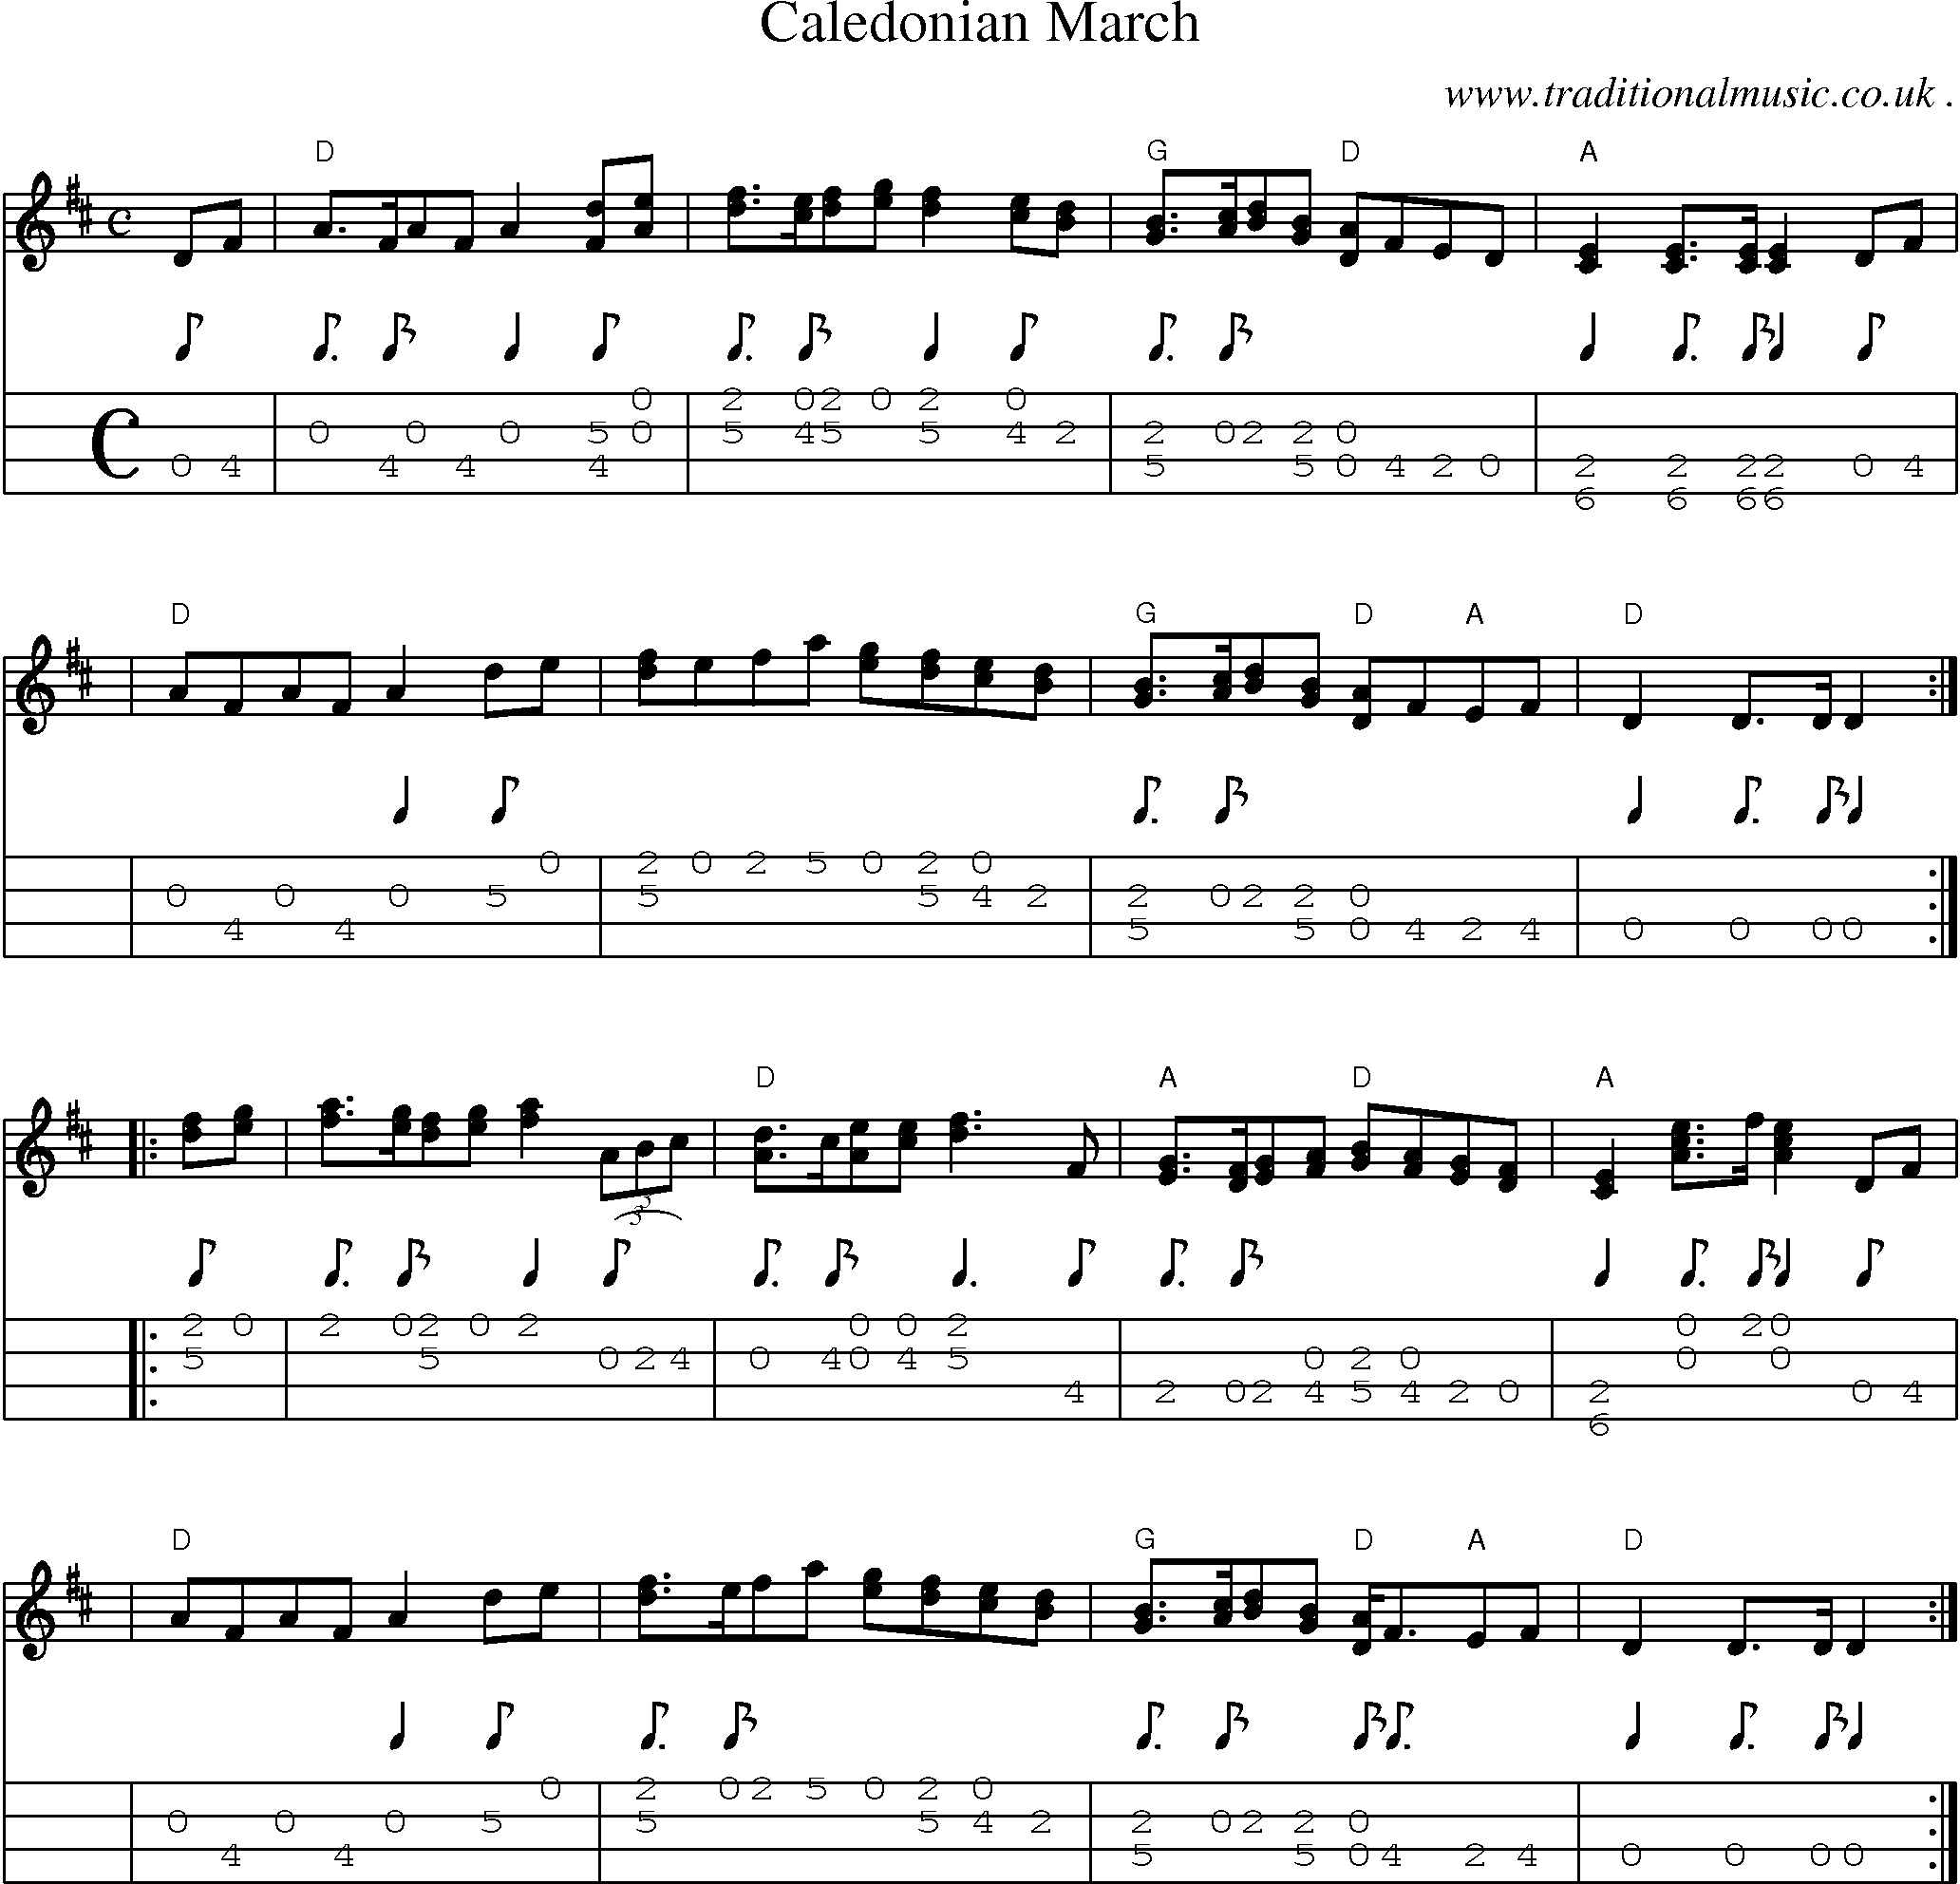 Music Score and Mandolin Tabs for Caledonian March